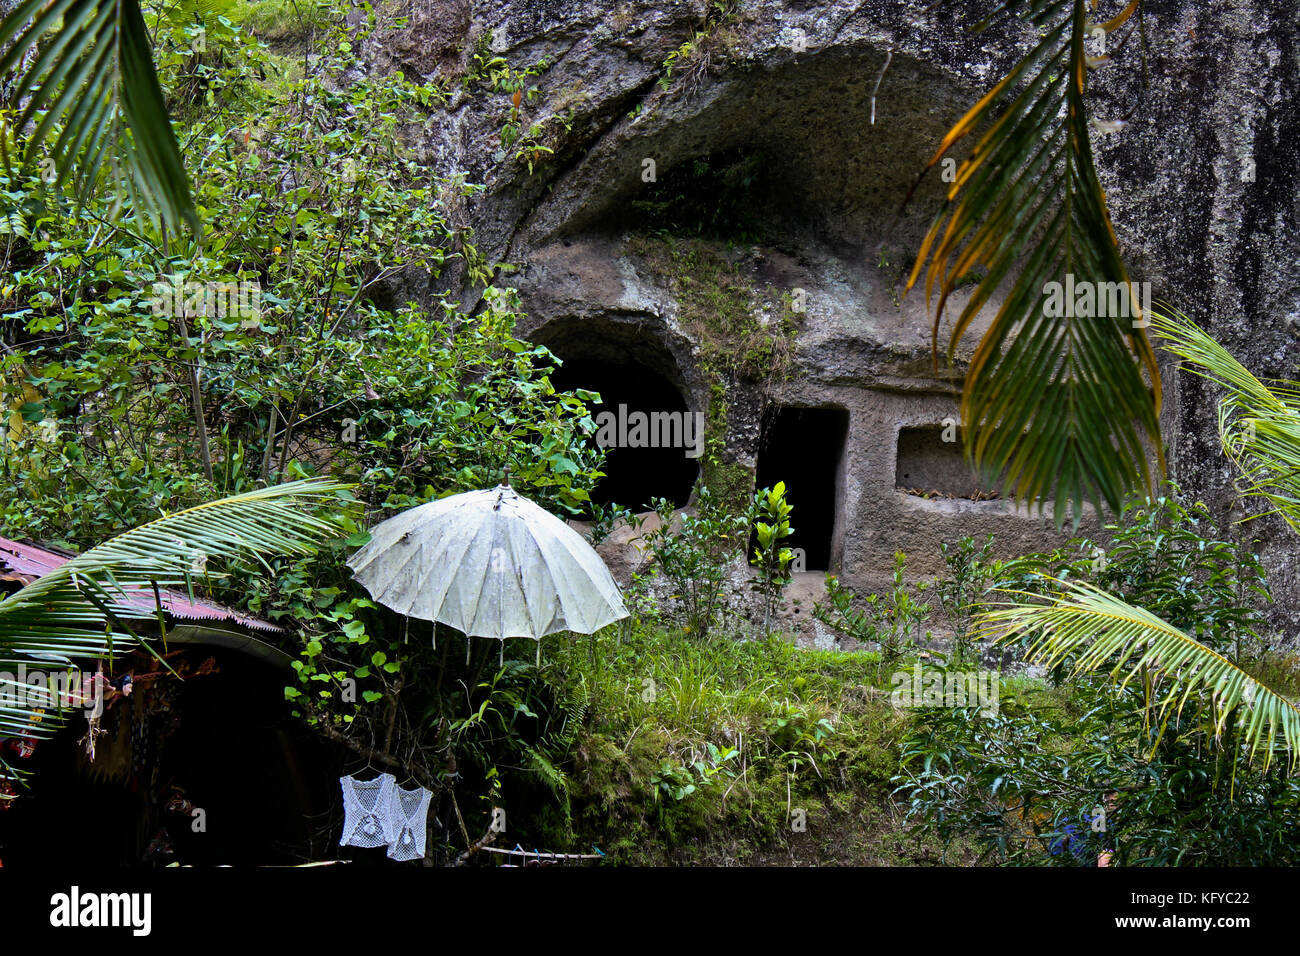 ;-) Ante Litteram Emoticon - The windows of this ancient Indonesian temple look like an emoticon. Gunung Kawi Temple,Ubud, Bali (Indonesia) Stock Photo